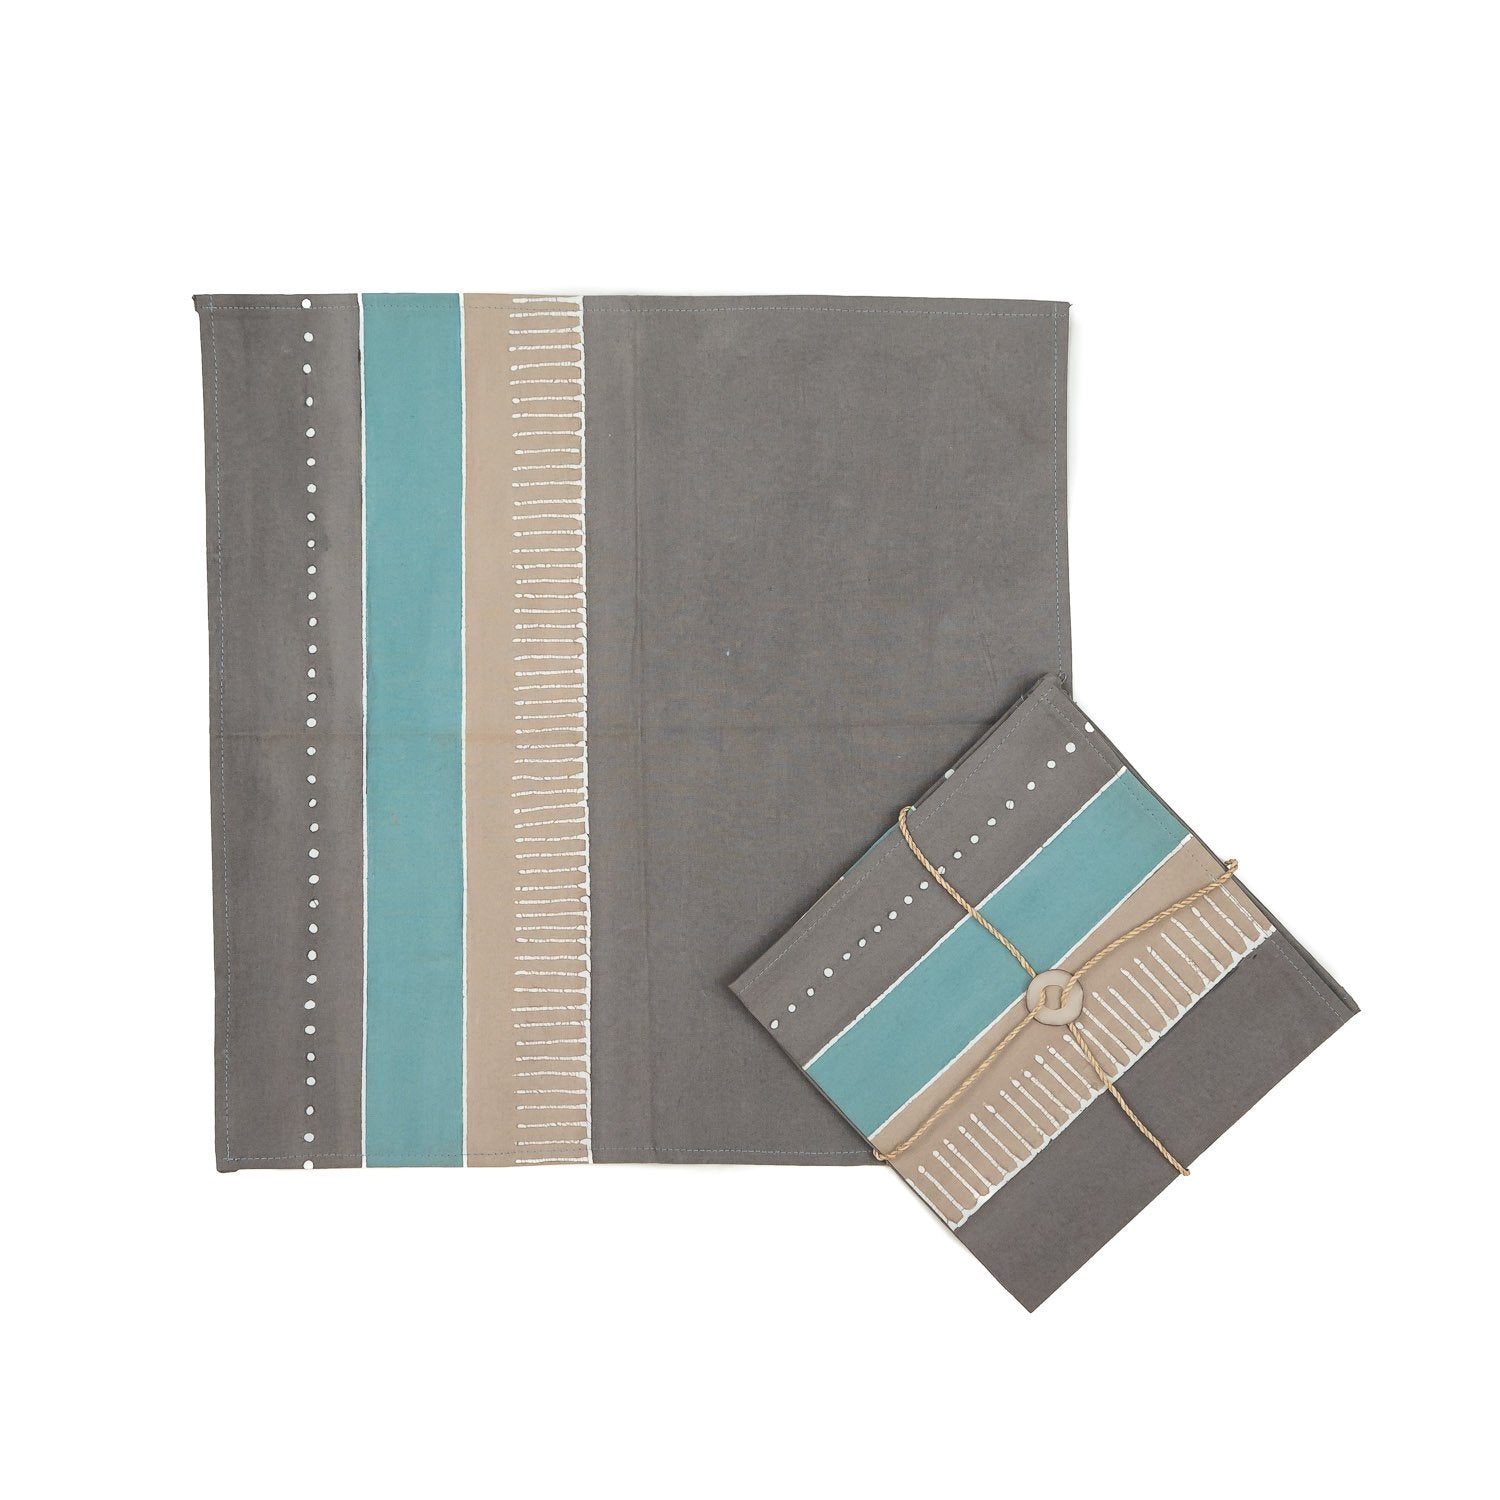 Hand-painted Napkins with african patterns in teal and grey colours